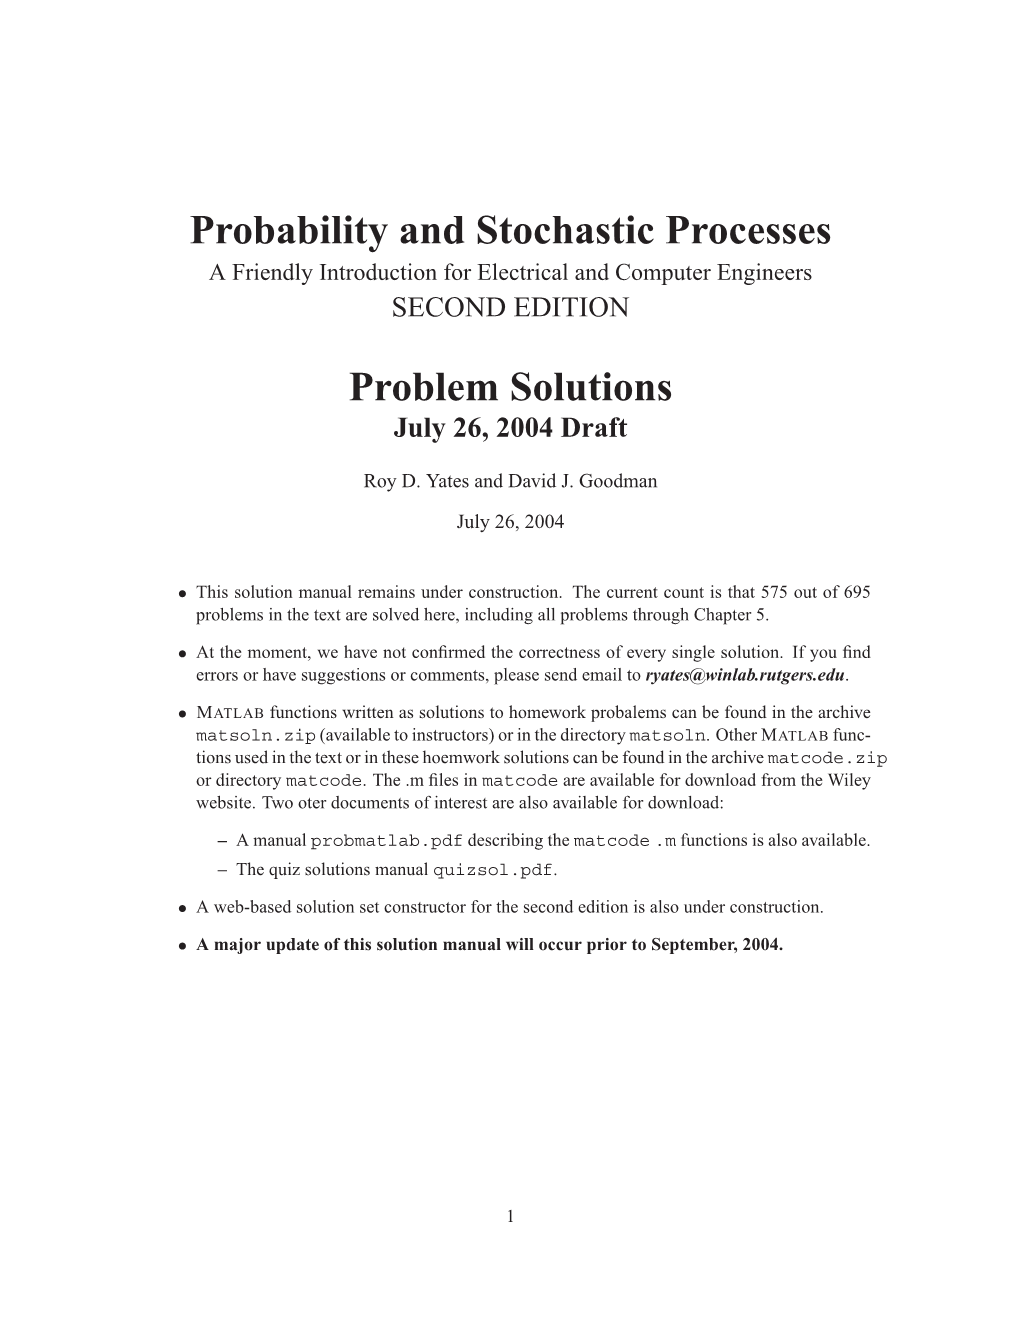 Probability and Stochastic Processes Problem Solutions